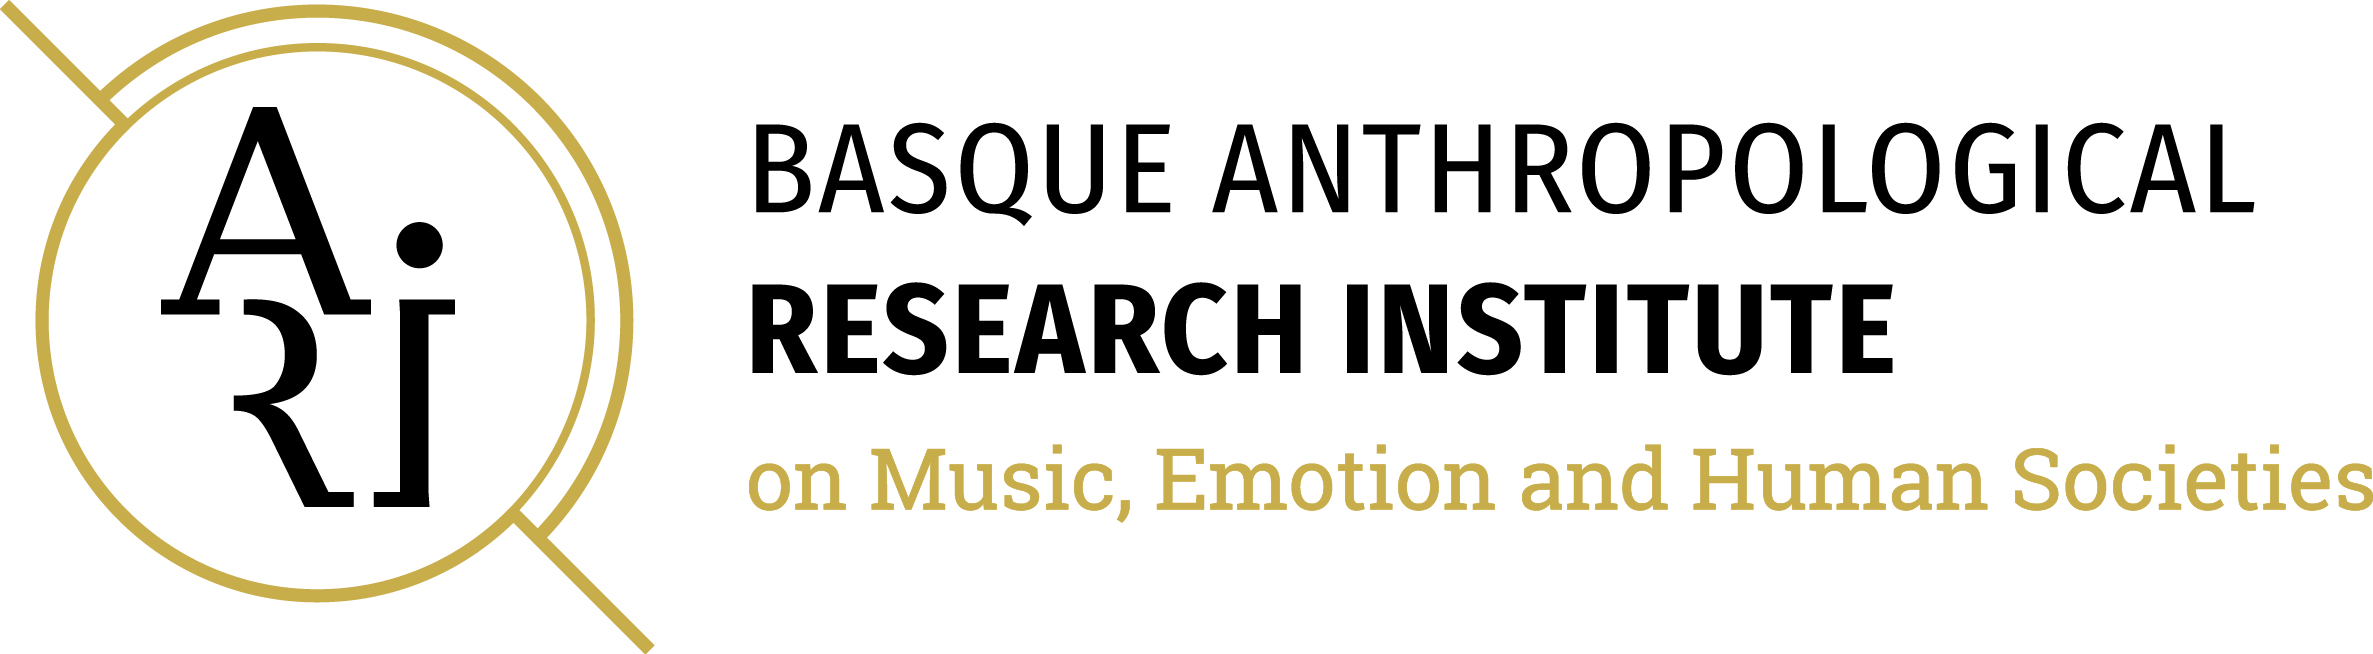 ARI – Anthropological Research Institute on Music  Basque Anthropological Research Institute on Music, Emotion and Human Societies